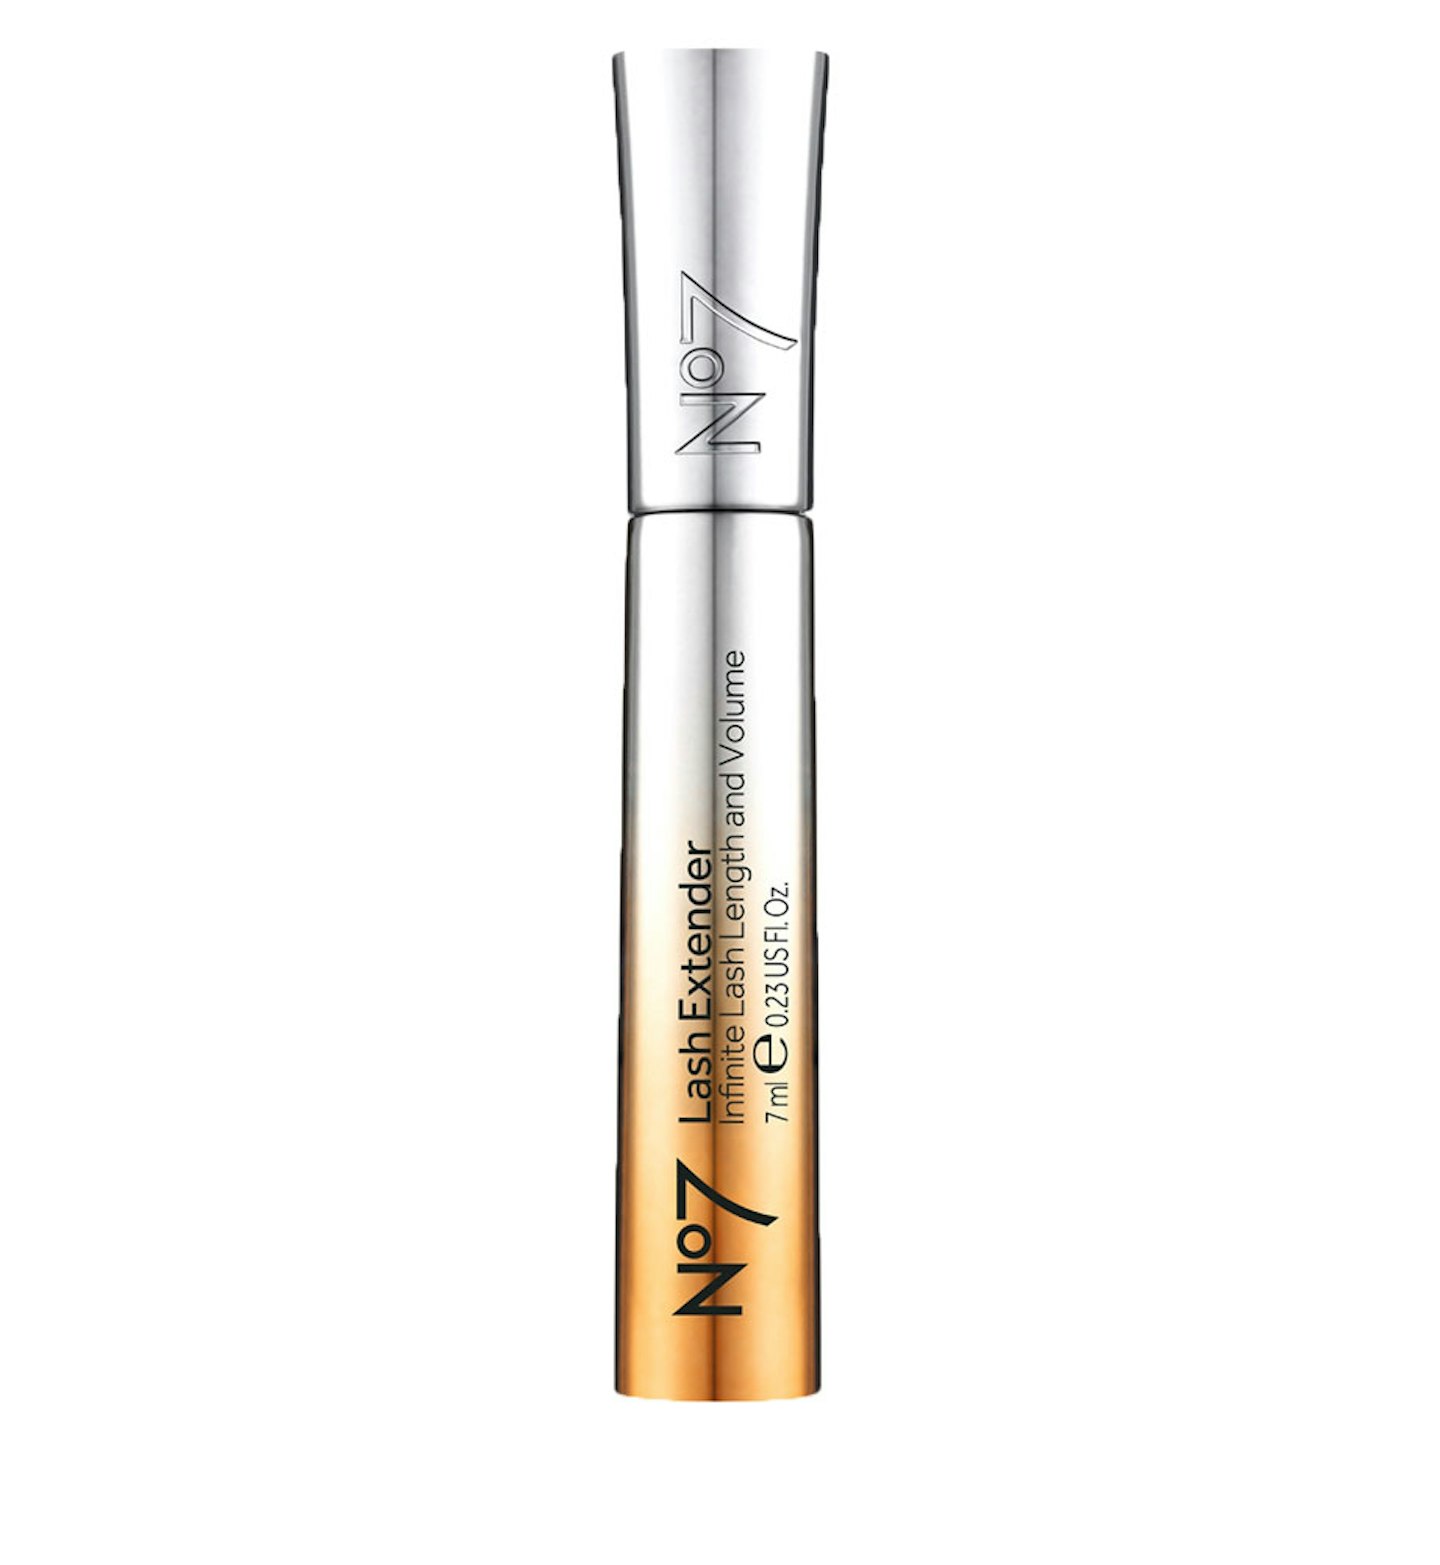 No7 Lash Extender Mascara, £13.99 from Boots